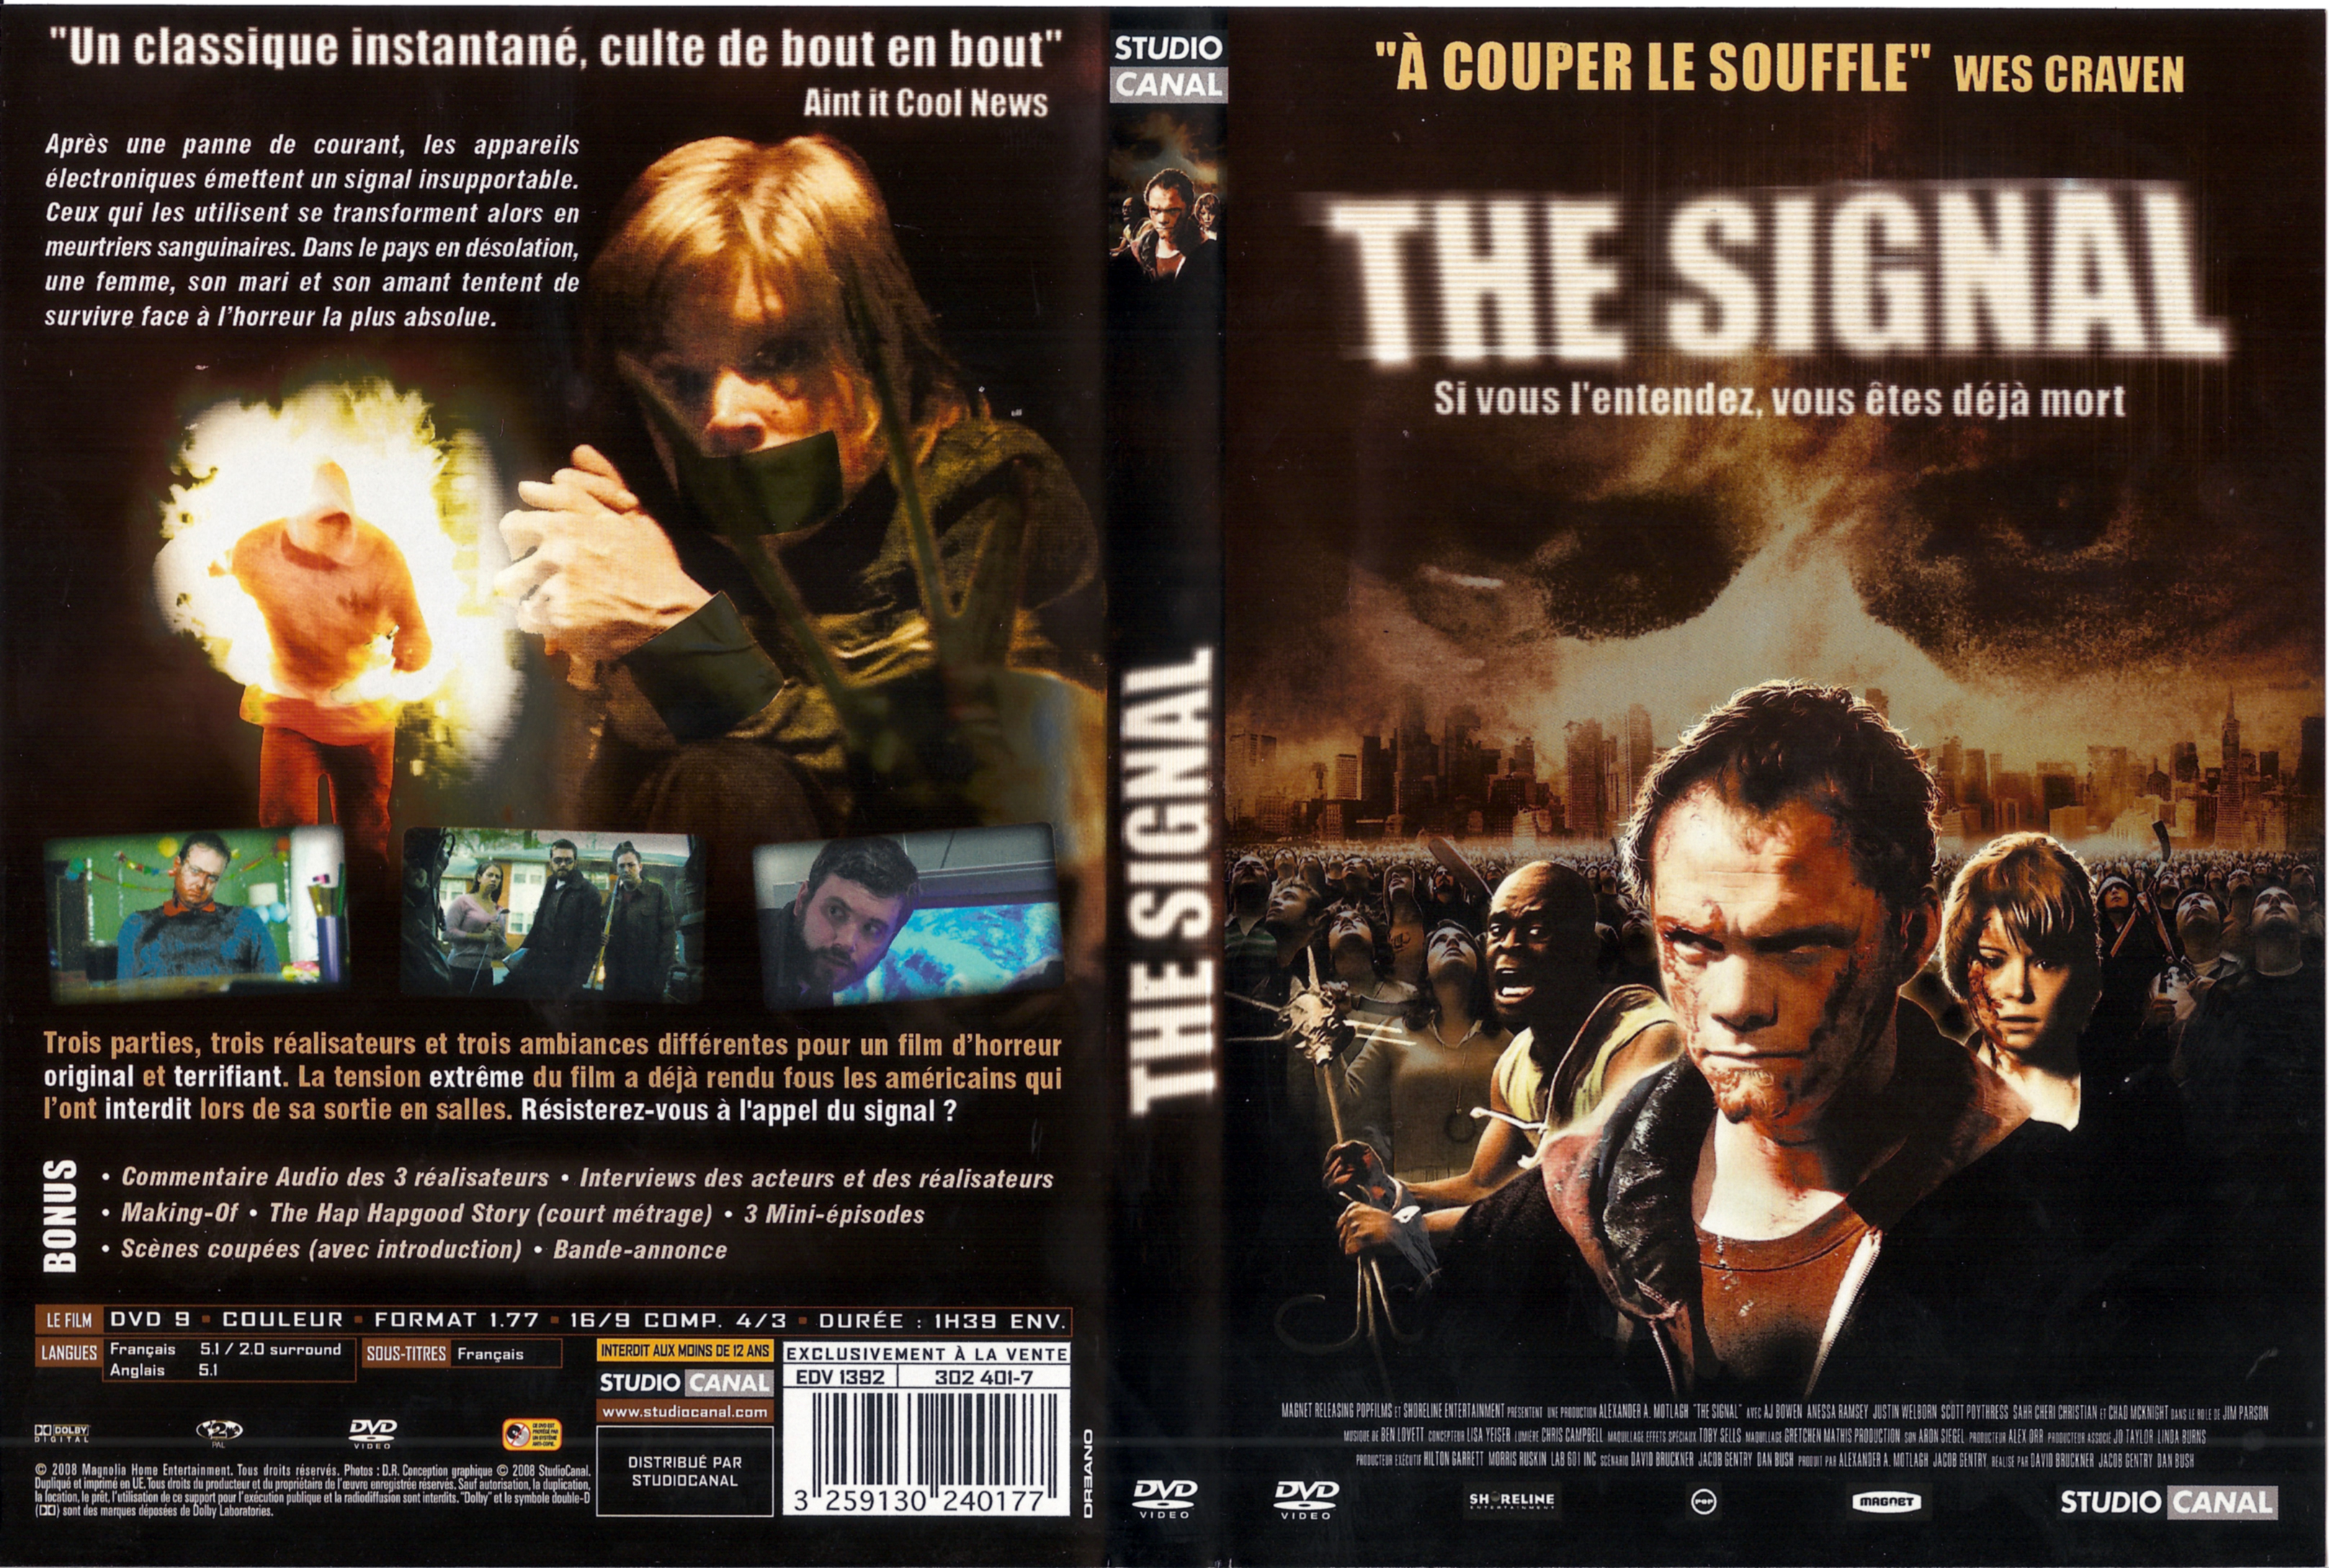 Jaquette DVD The signal